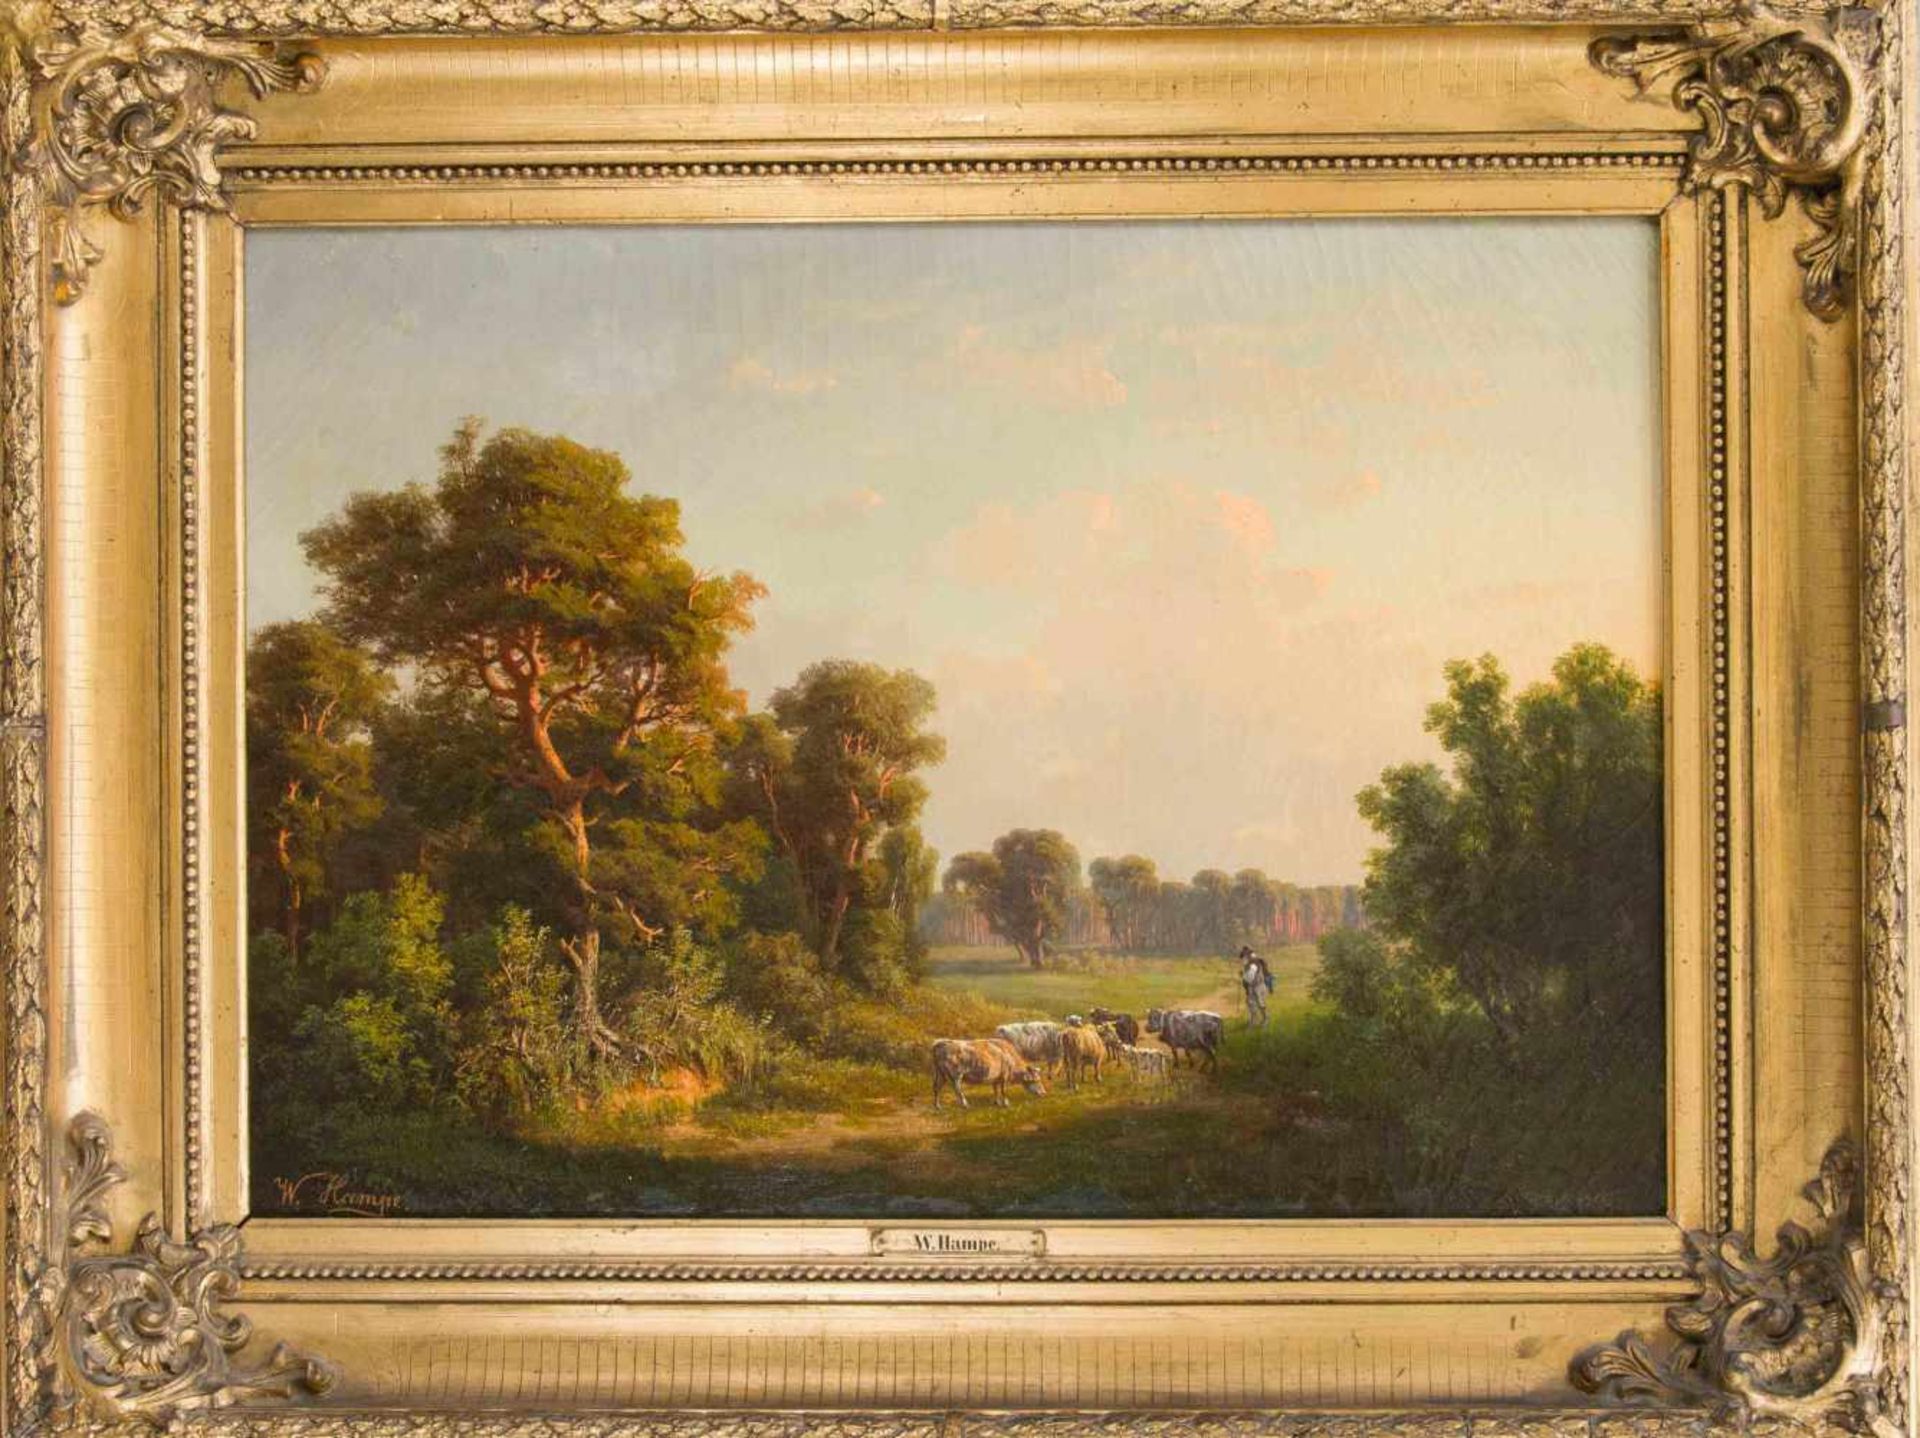 Wilhelm Hampe (1817-?), German landscape painter, large idyll with herd of cows in asummer landscape